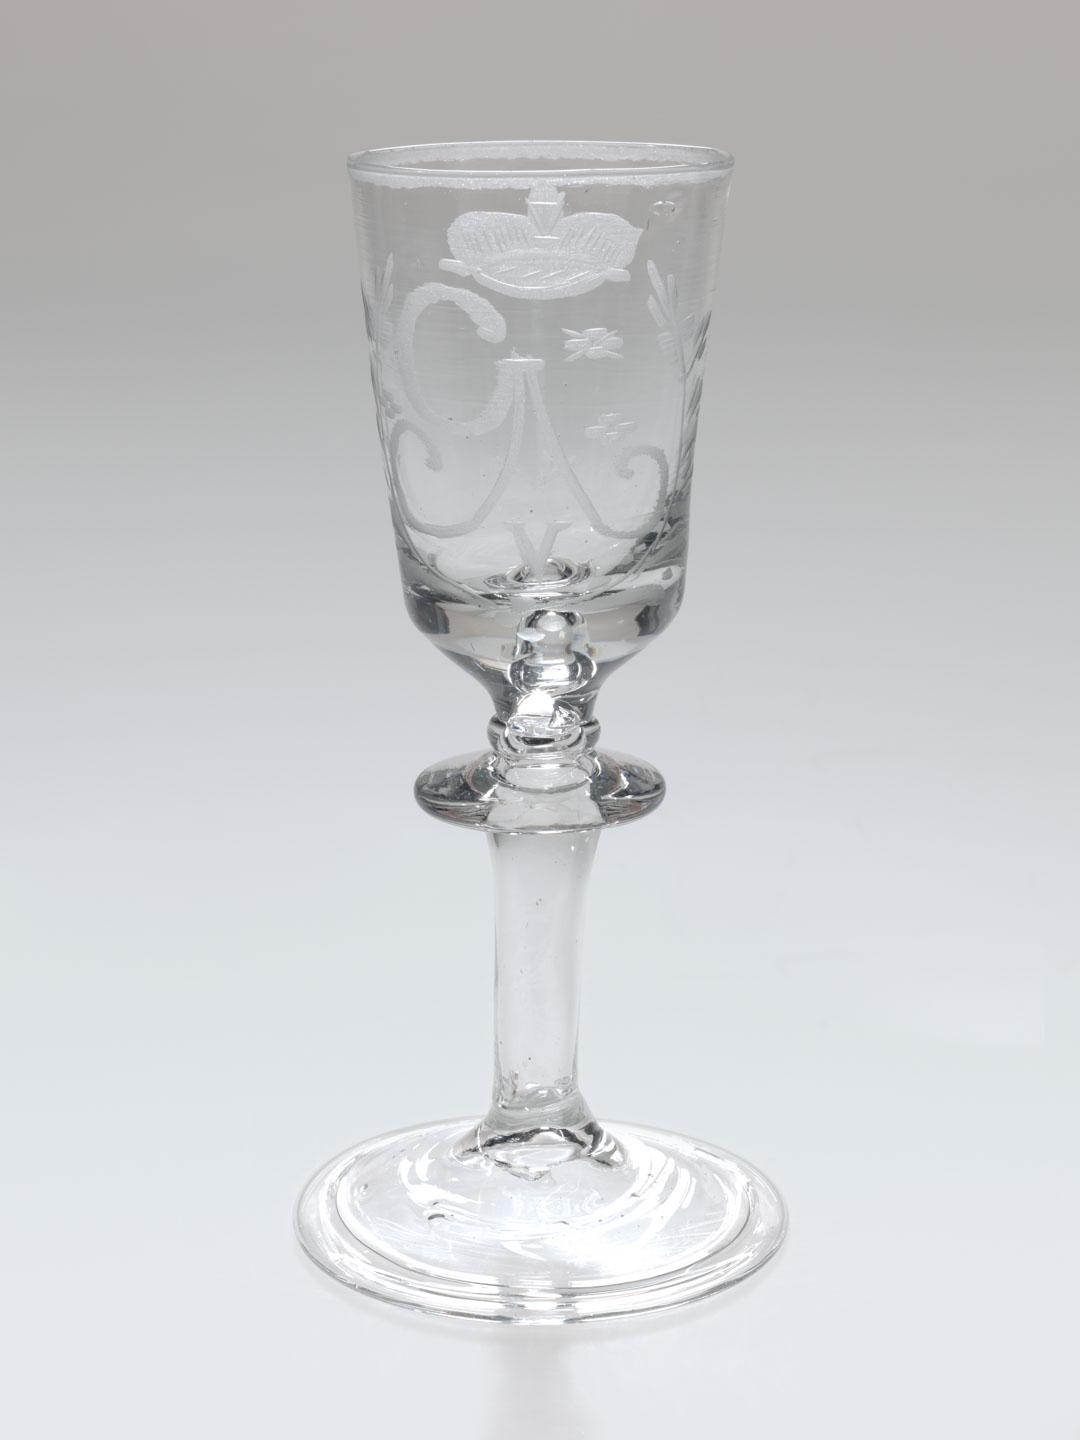 Artwork Goblet this artwork made of Glass, handblown with folded foot rim and engraved with stylised foliate motifs, a crown and "GAV" in monogram, created in 1740-01-01